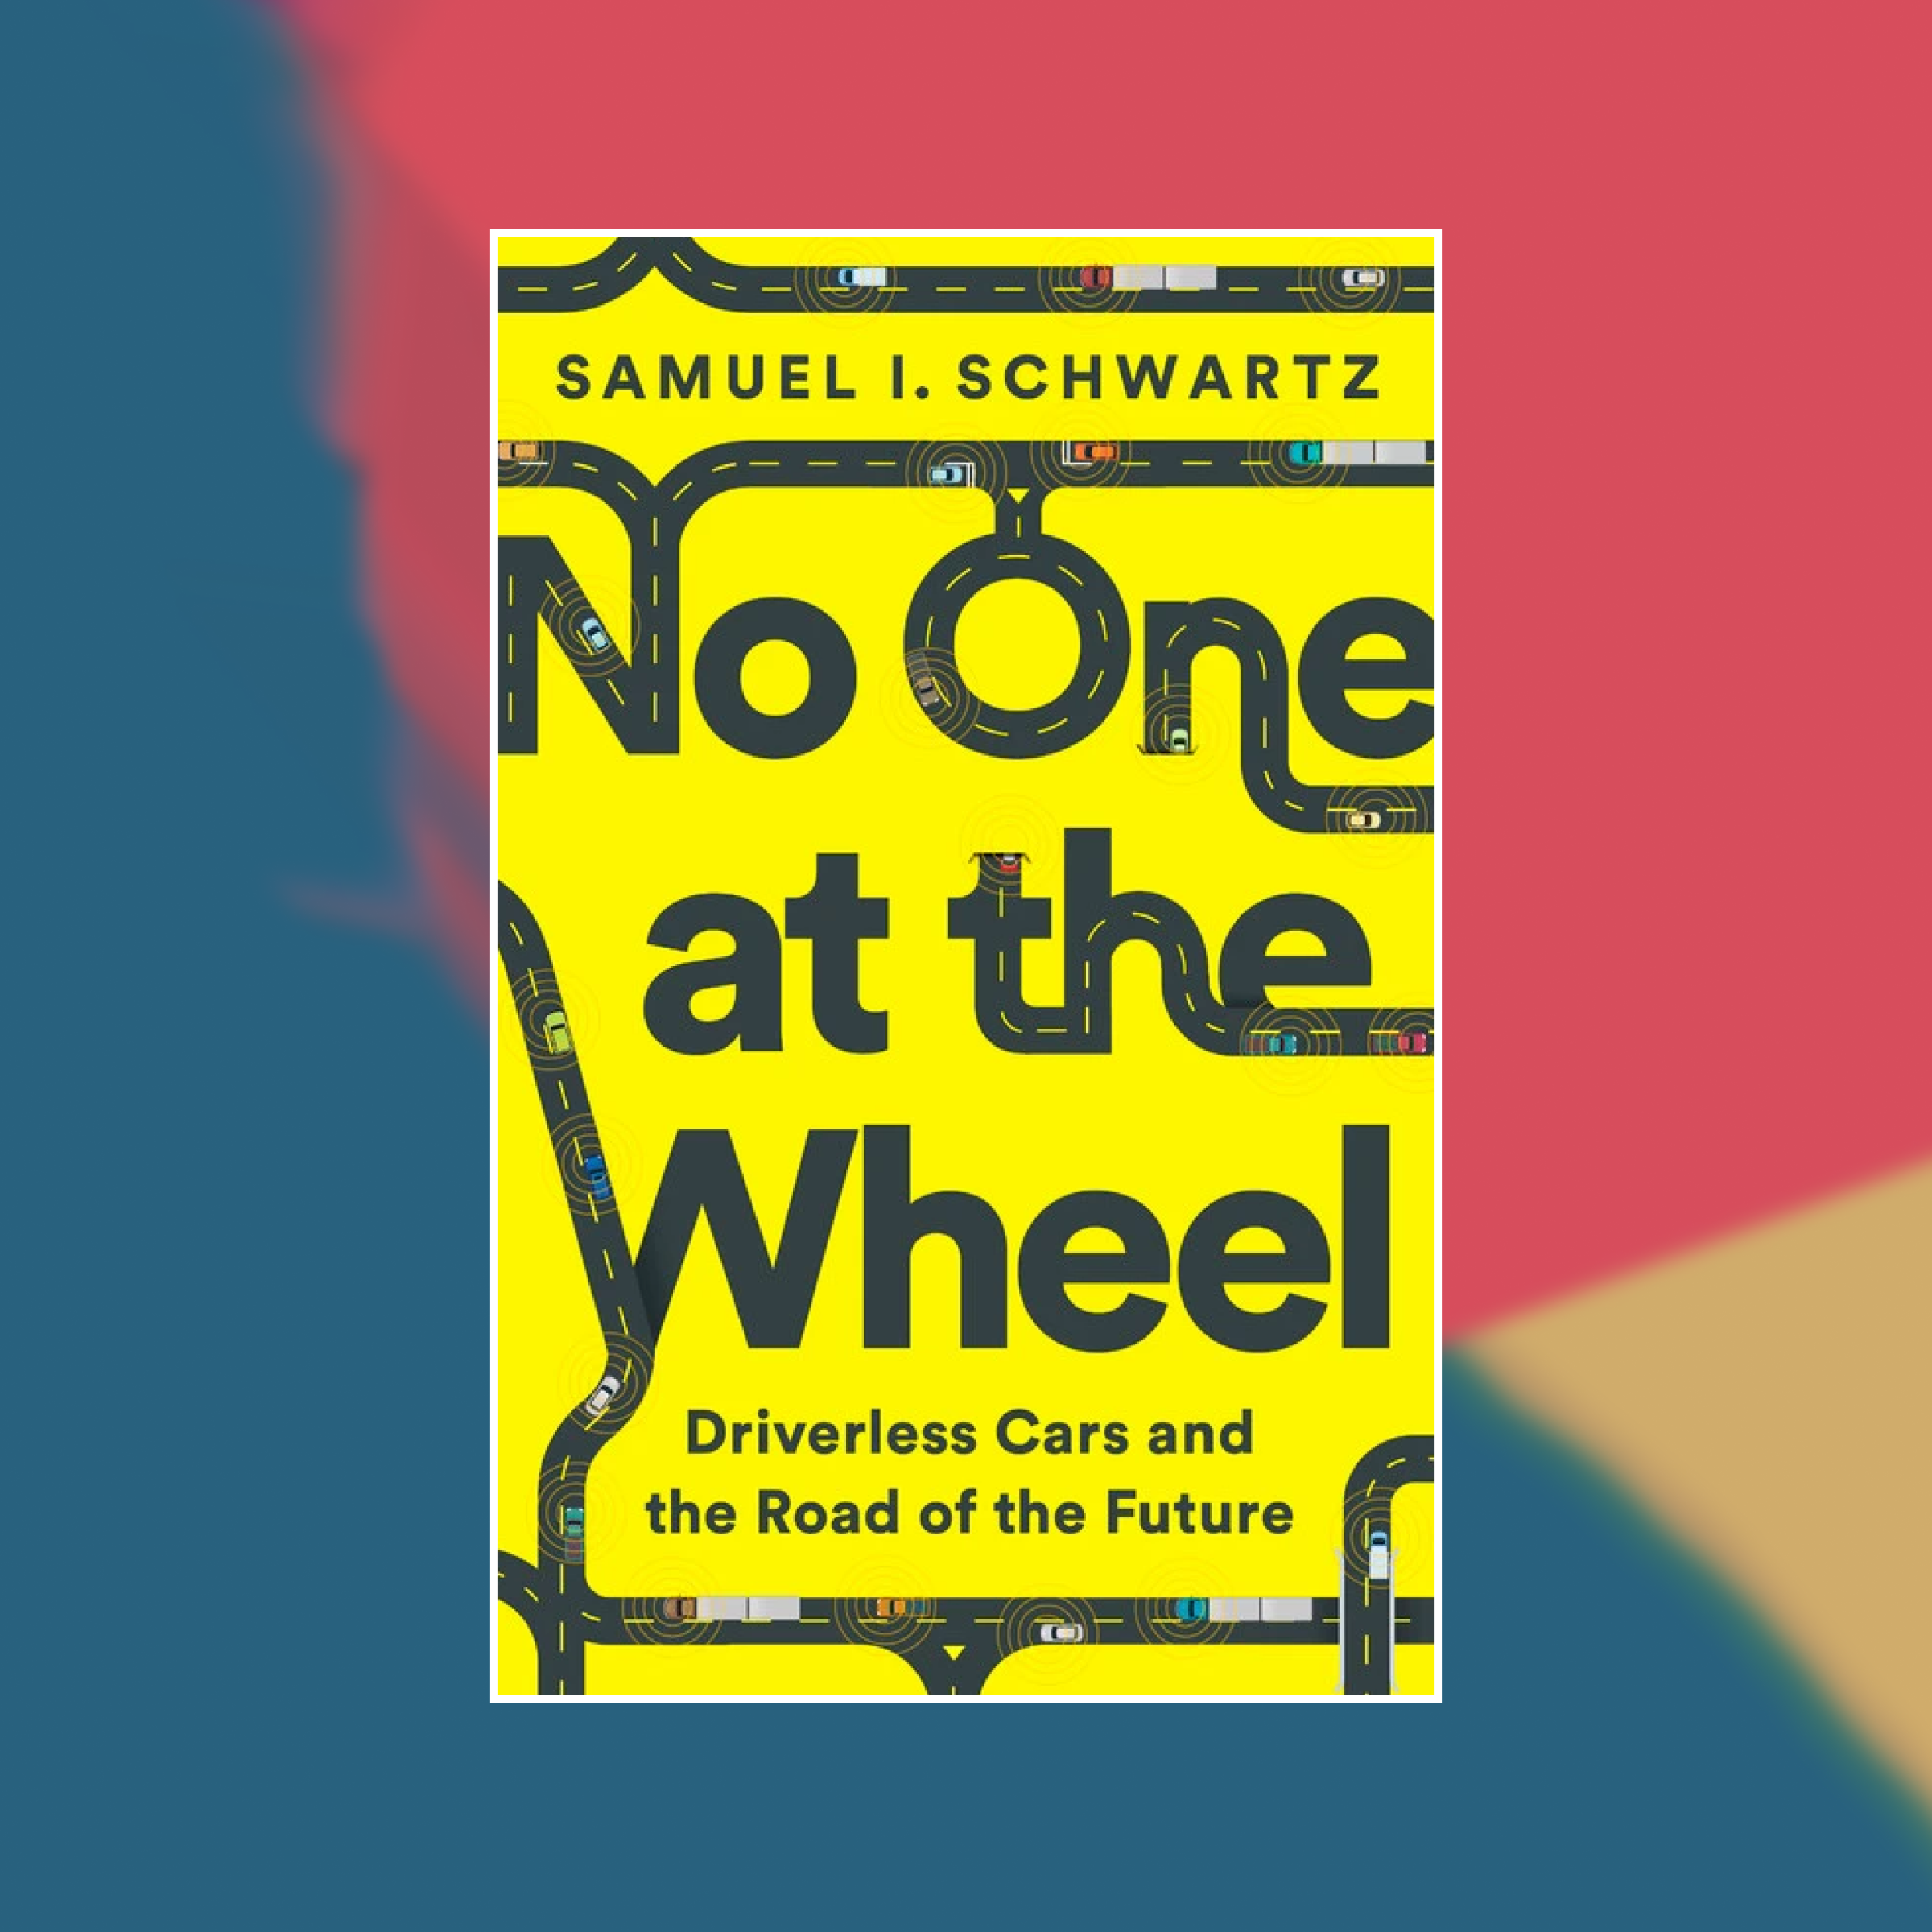 Book cover of No One at the Wheel against a painted background